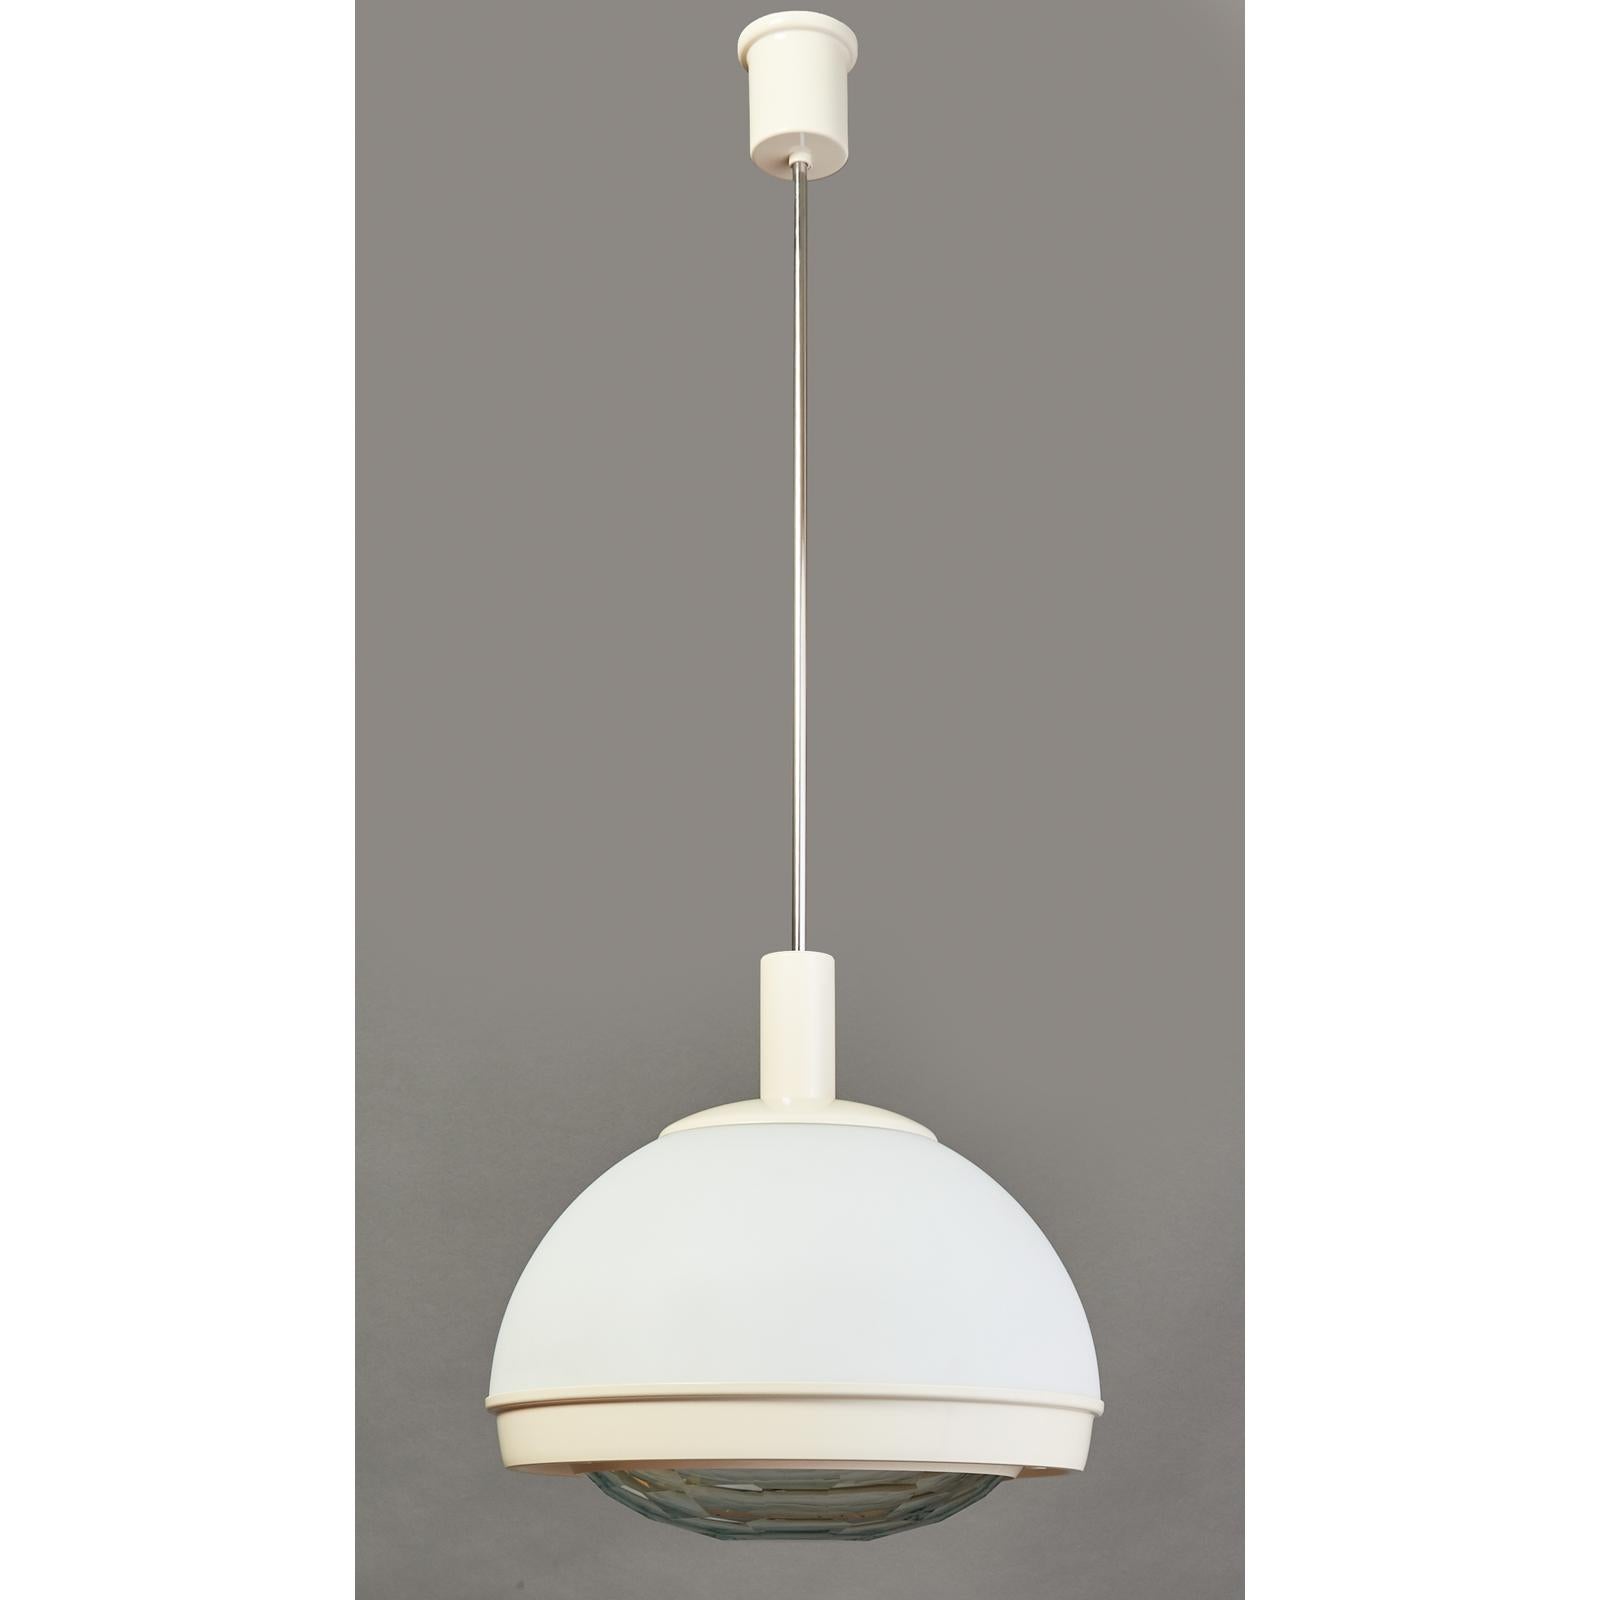 Italy, 1960s.
Pendant white glass chandelier with faceted glass lens, enameled and nickeled metal mounts.
Dimensions: 16 diameter x 39 height
Rewired for use in the USA with four standard base bulbs, one down light in lower chamber with faceted